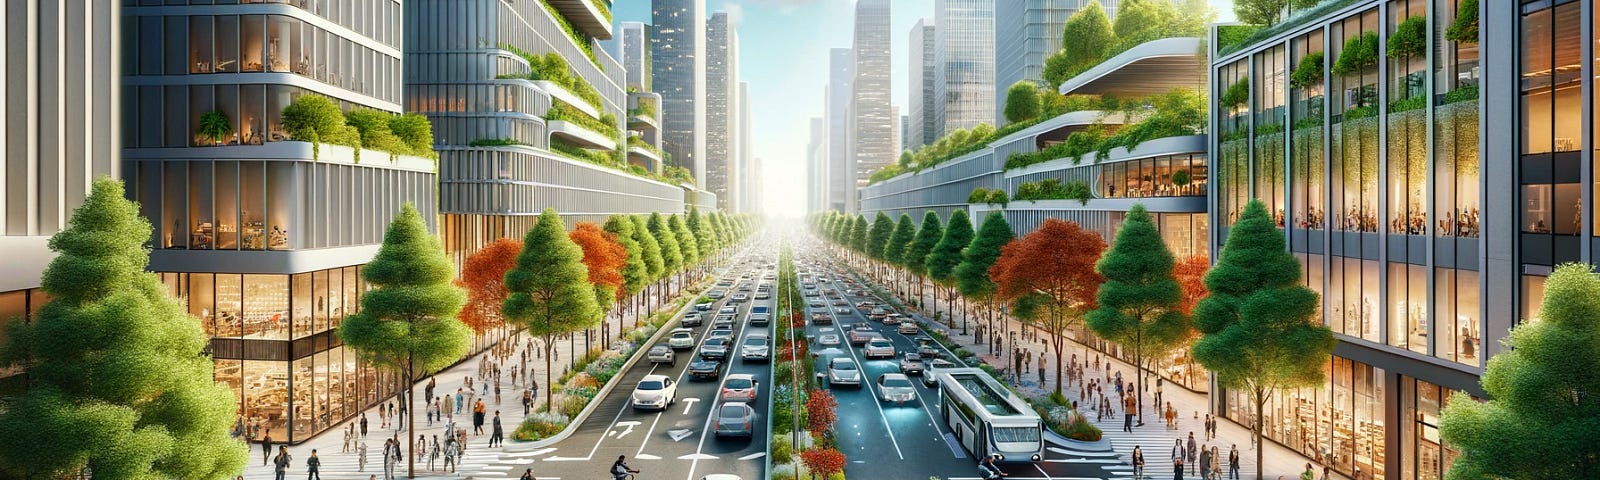 ChatGPT & DALL-E generated panoramic image of a bustling city street, designed as a complete street with trees, bike lanes, pedestrian paths, parking, and all-electric vehicles.